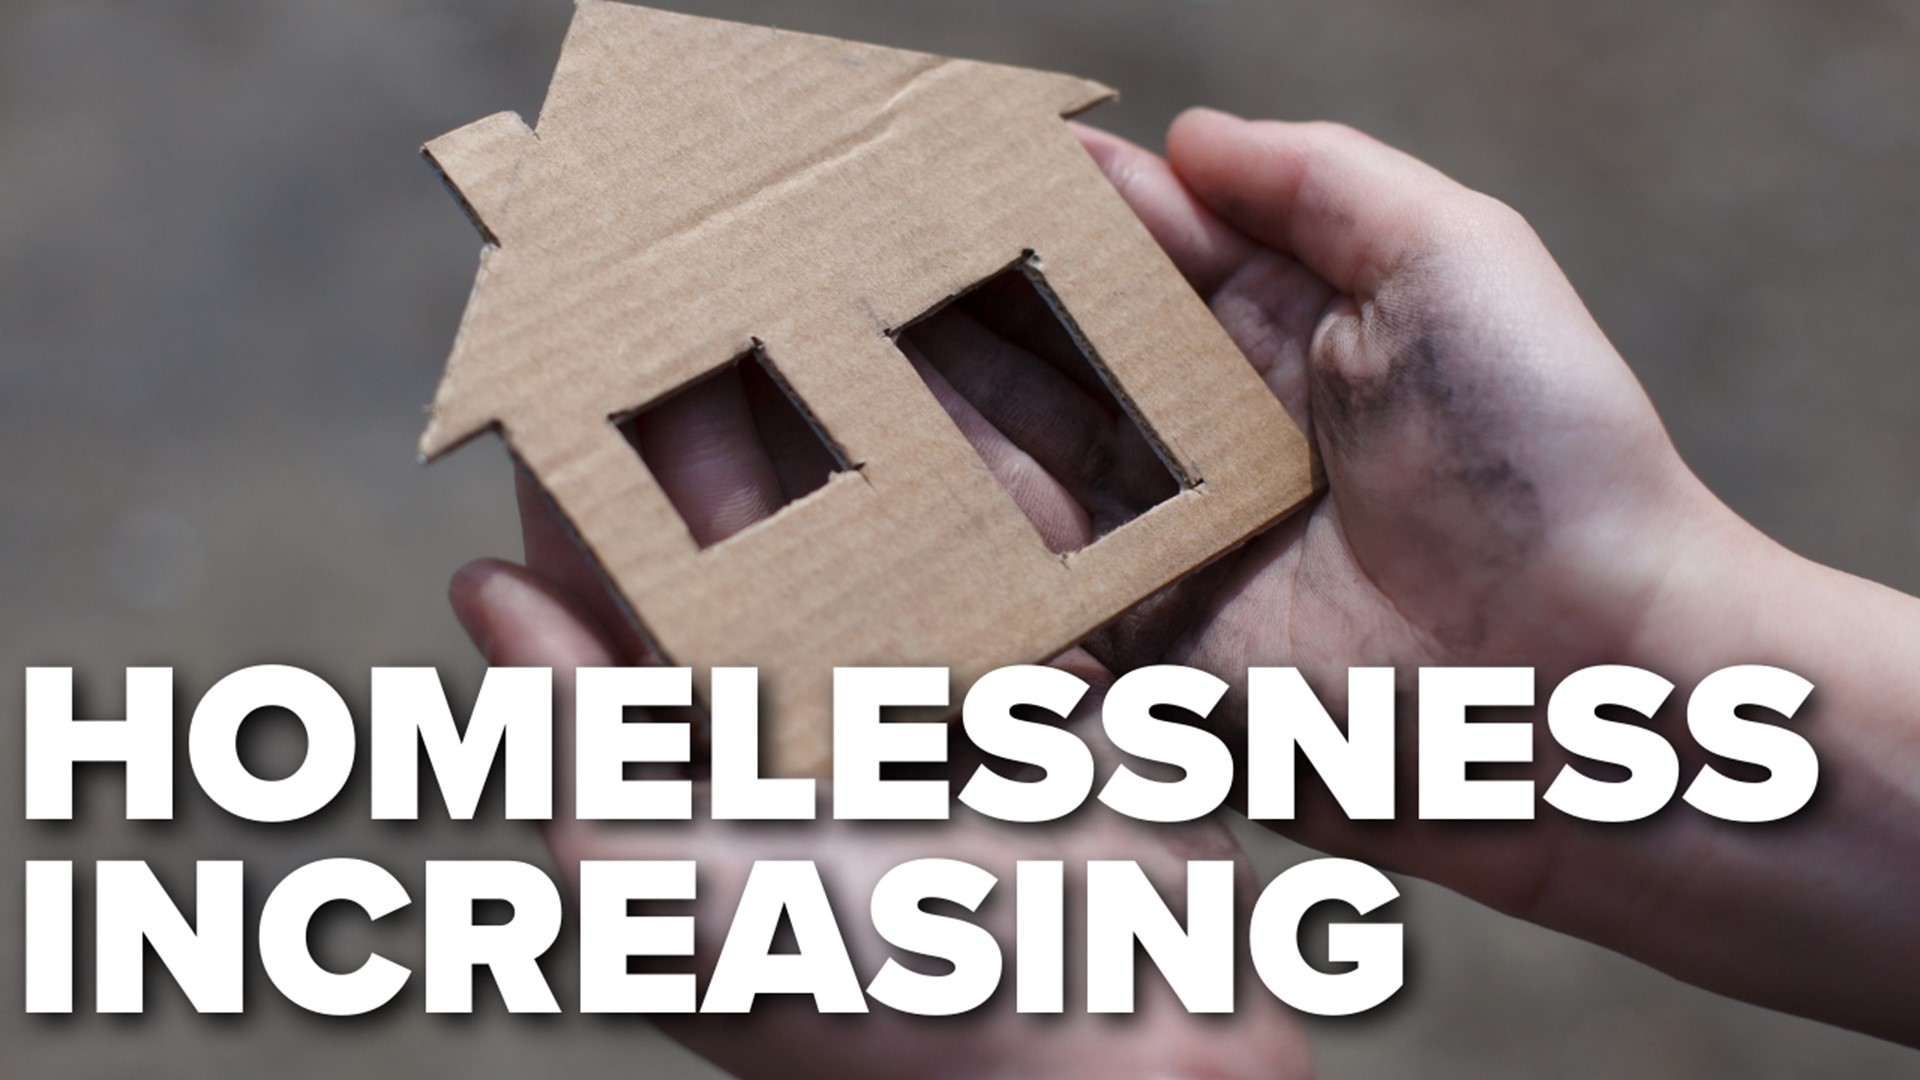 Mecklenburg County released new data on homelessness. It showed the number of people who are homeless increased in the county by 3% from 2021 to 2022.